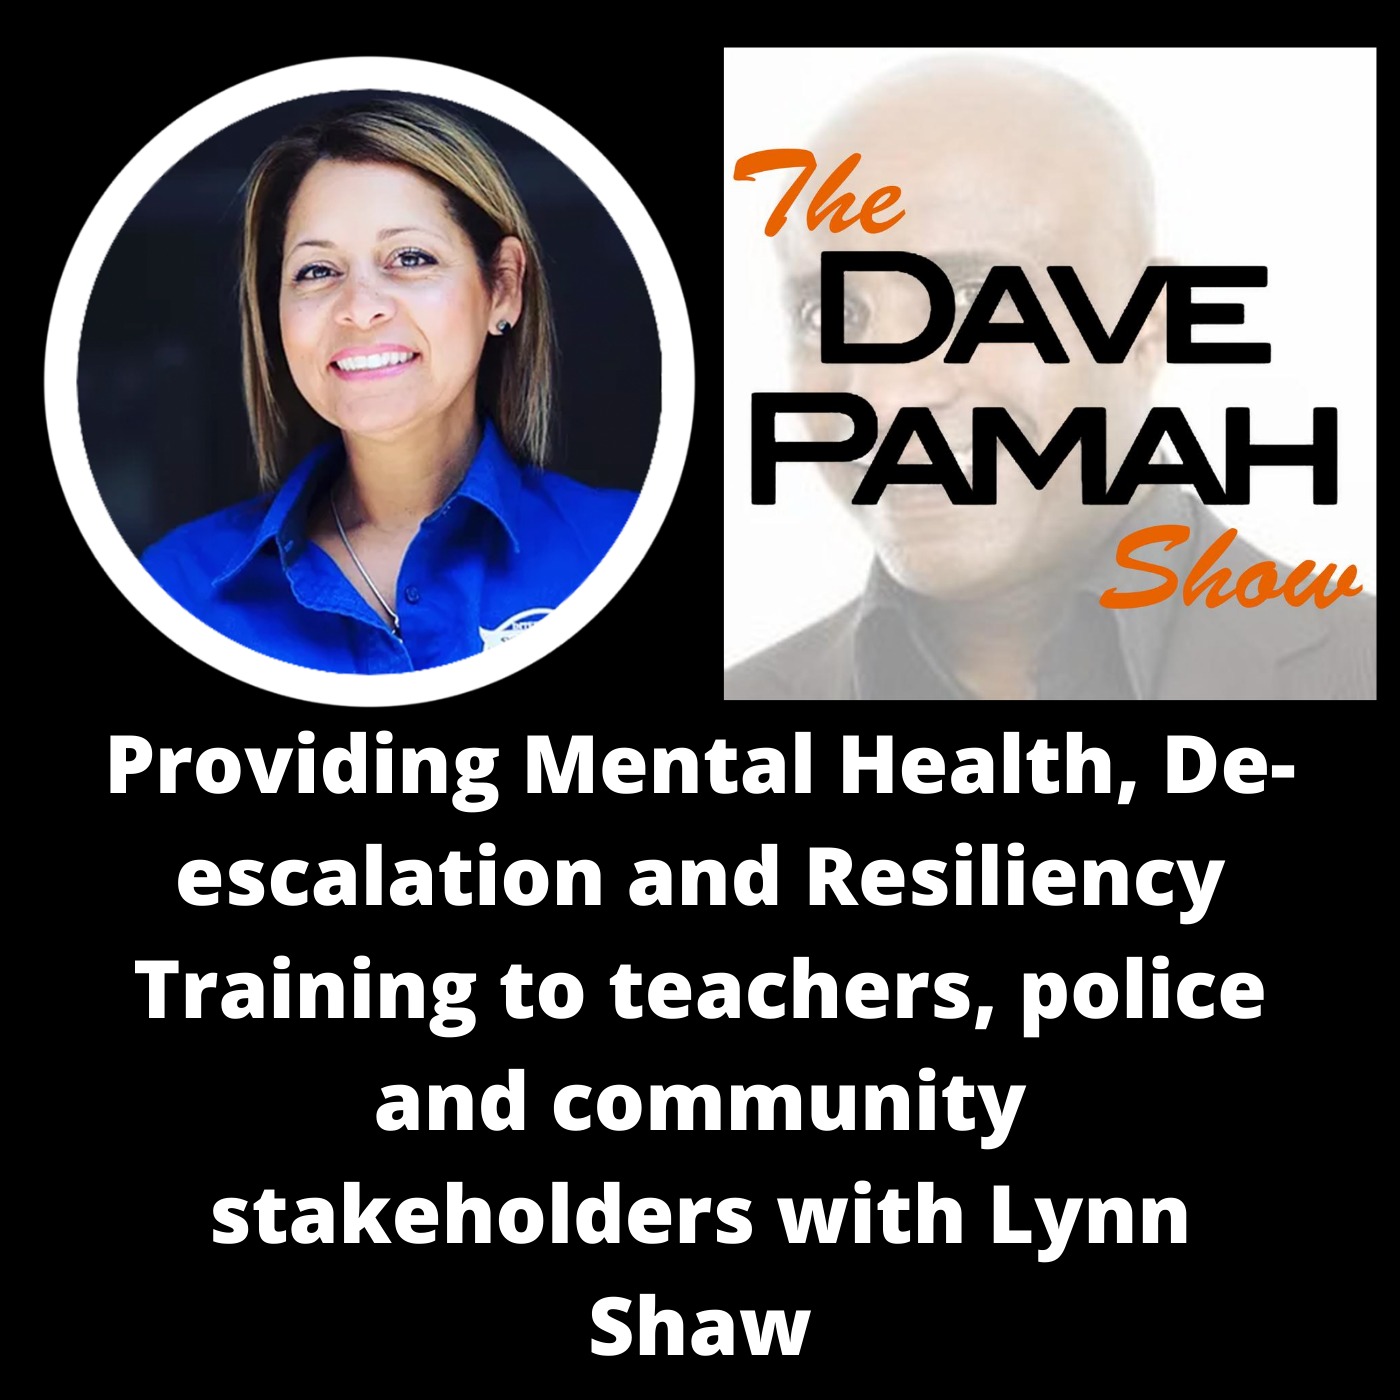 Providing Mental Health, De-escalation and Resiliency Training to teachers, police and community stakeholders with Lynn Shaw